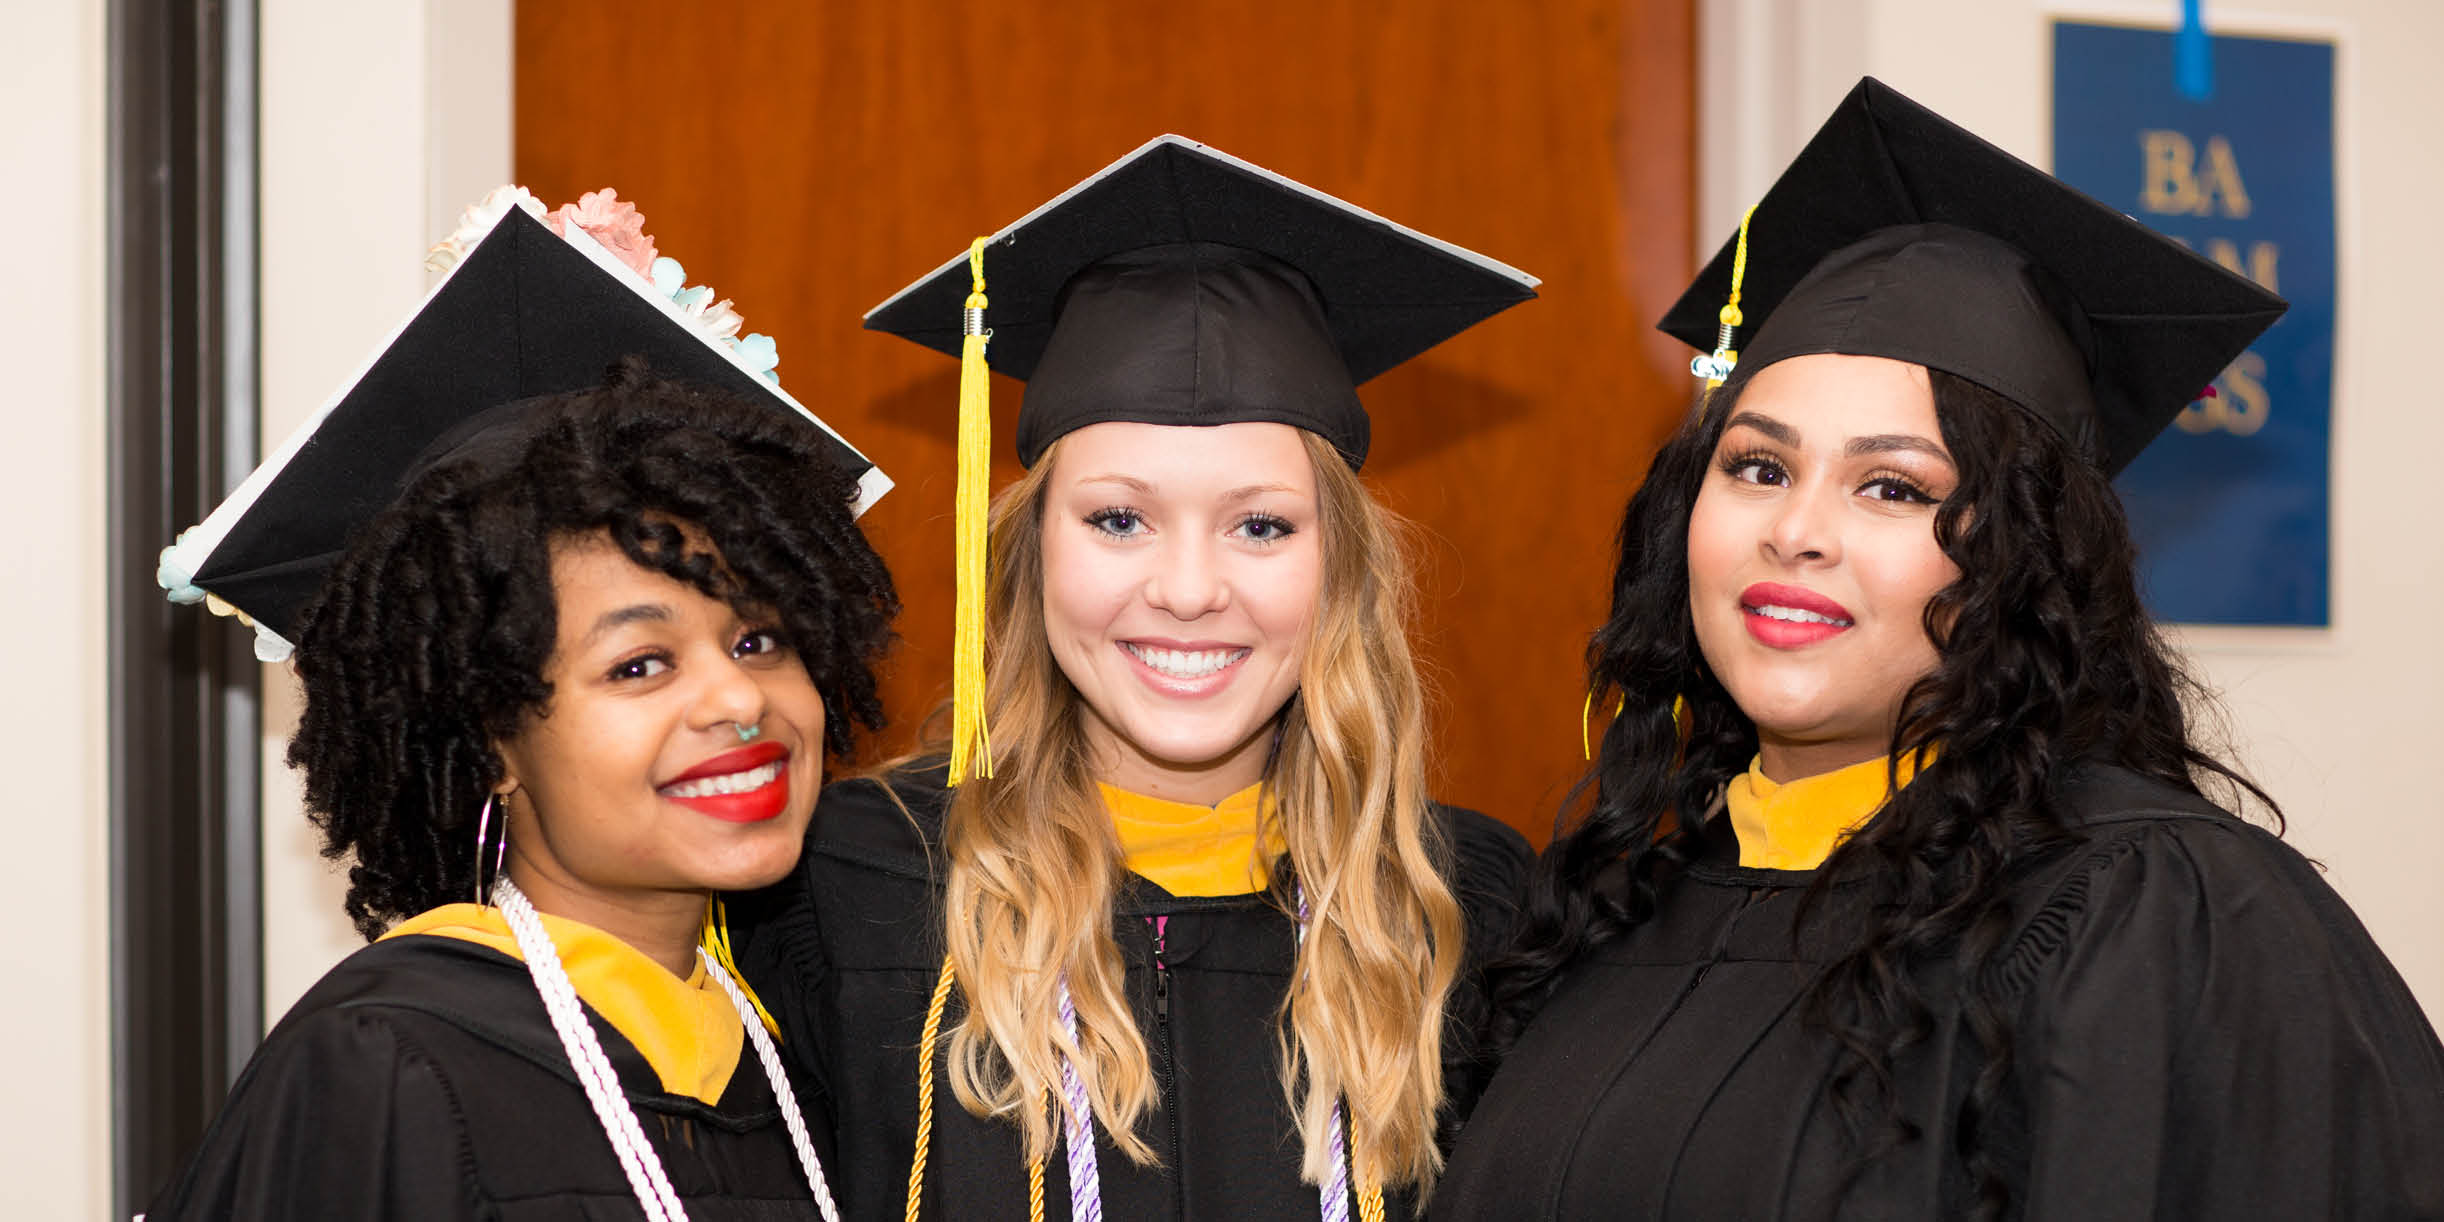 College of Saint Mary to host Commencement May 14-15 on campus ...